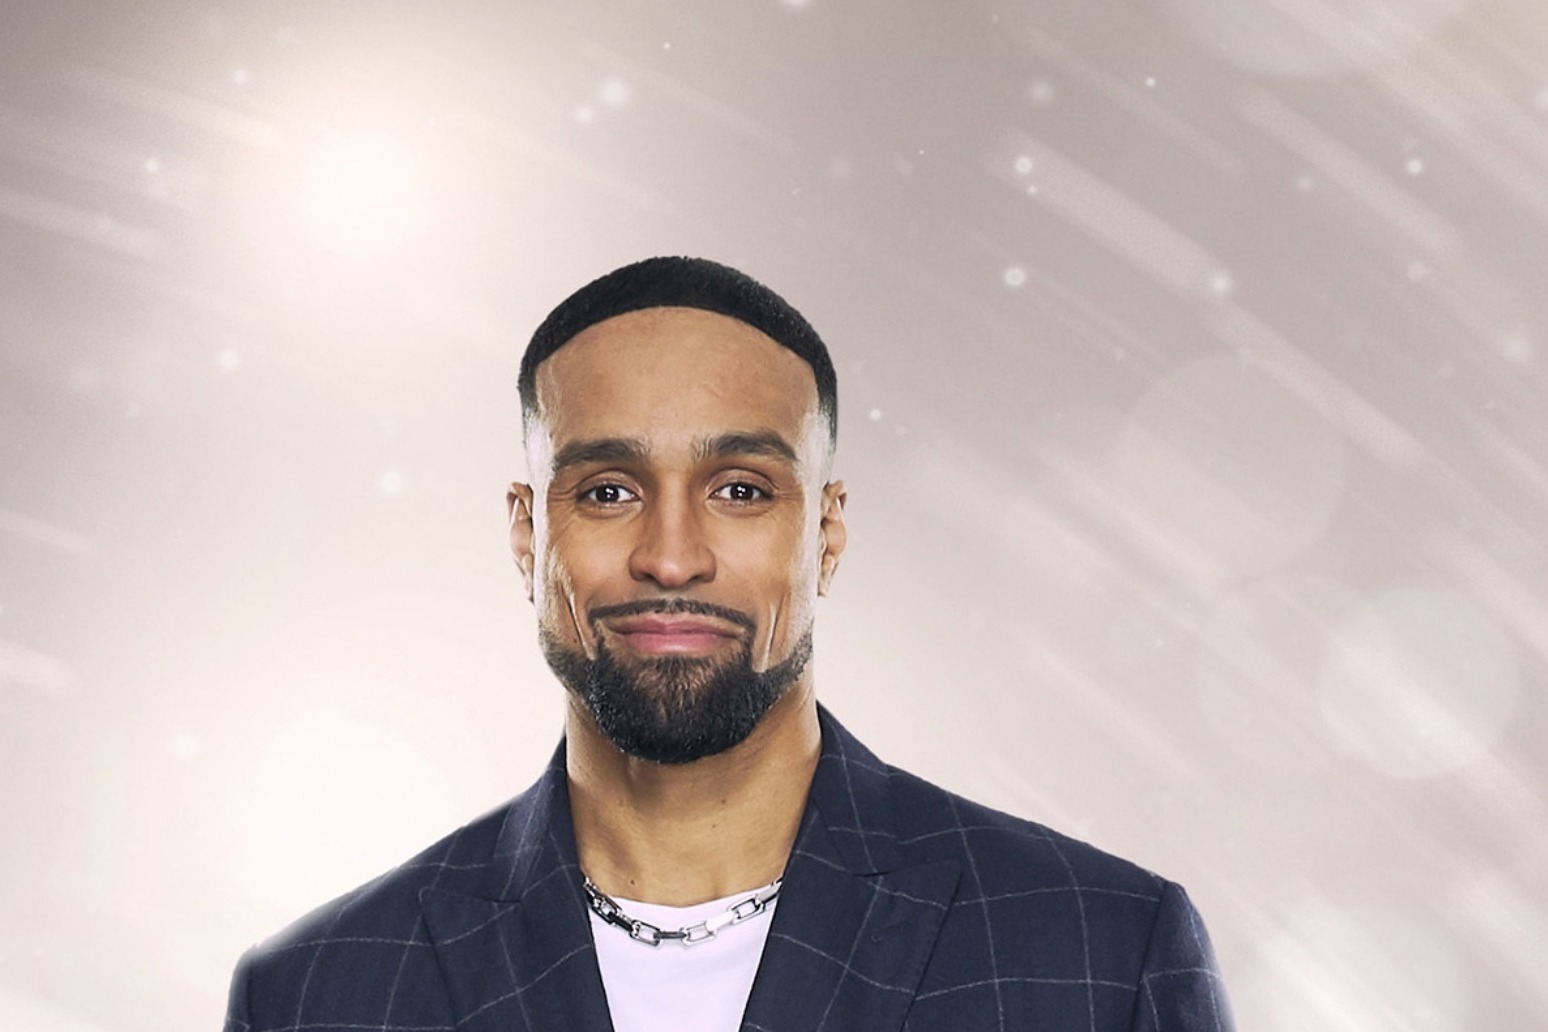 Ashley Banjo announces split from wife after 16 years together 